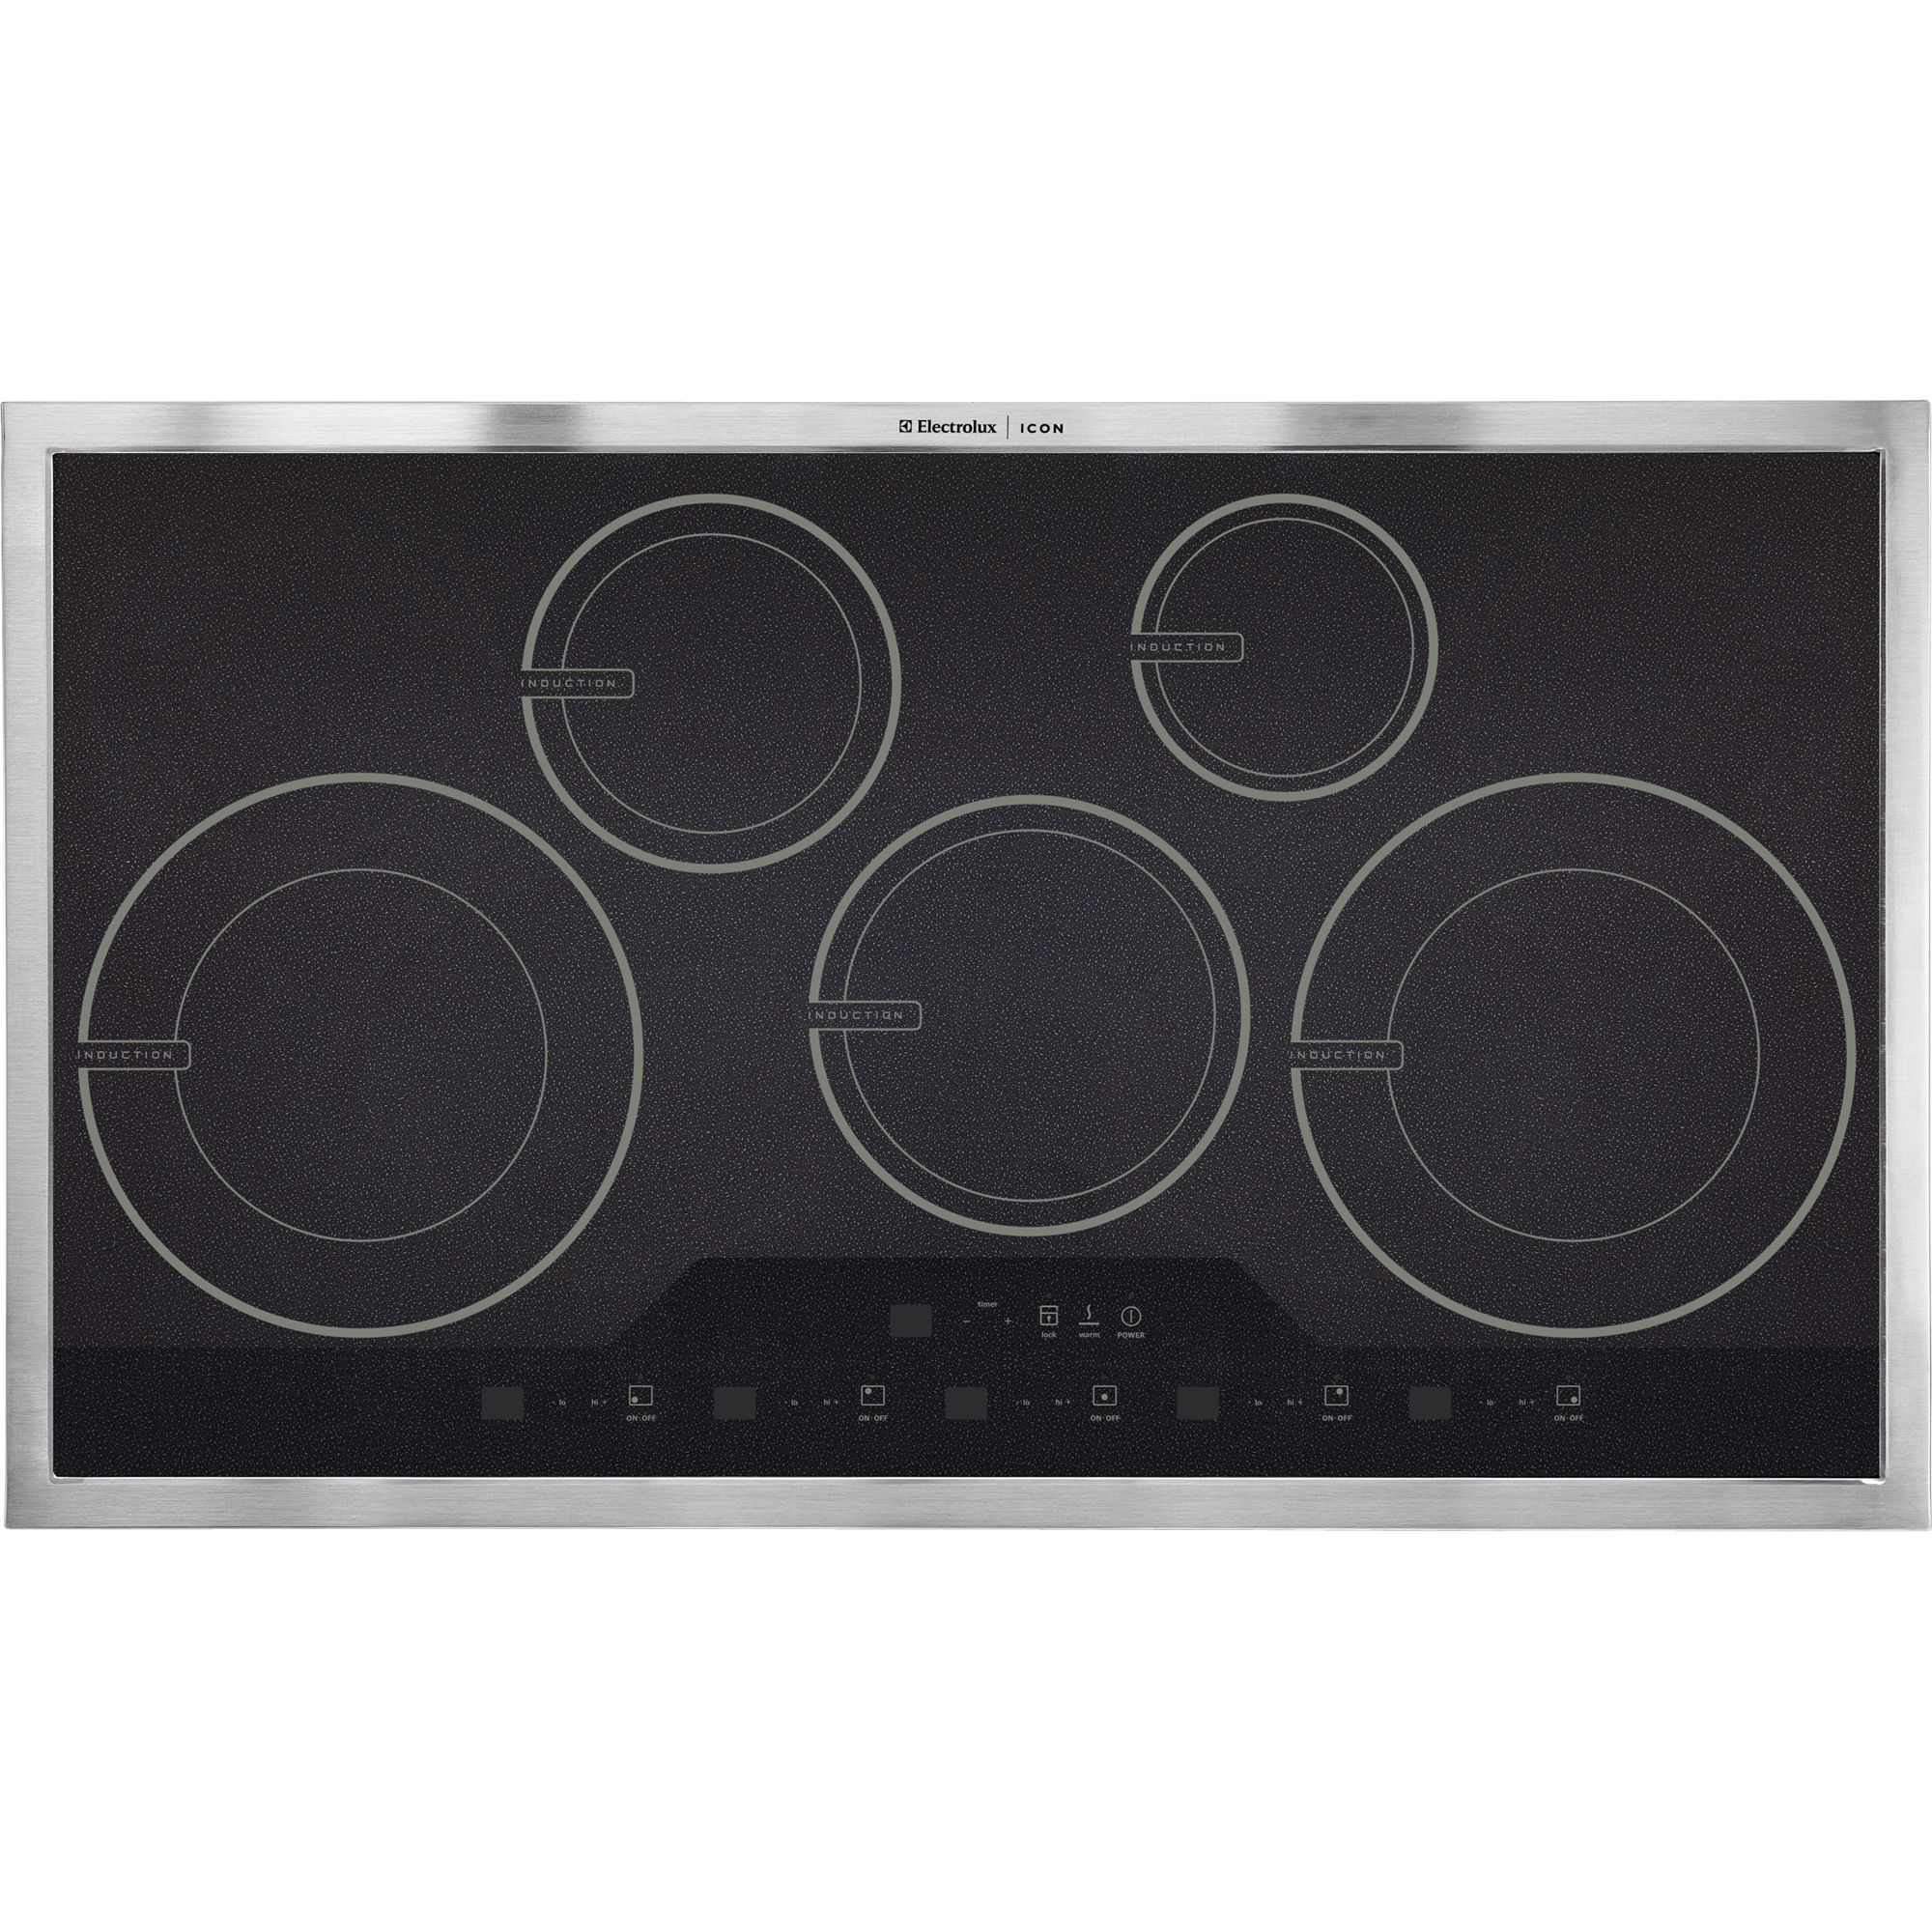 Electrolux ICON Designer Series 36 Stainless Steel Induction Cooktop - E36IC80ISS